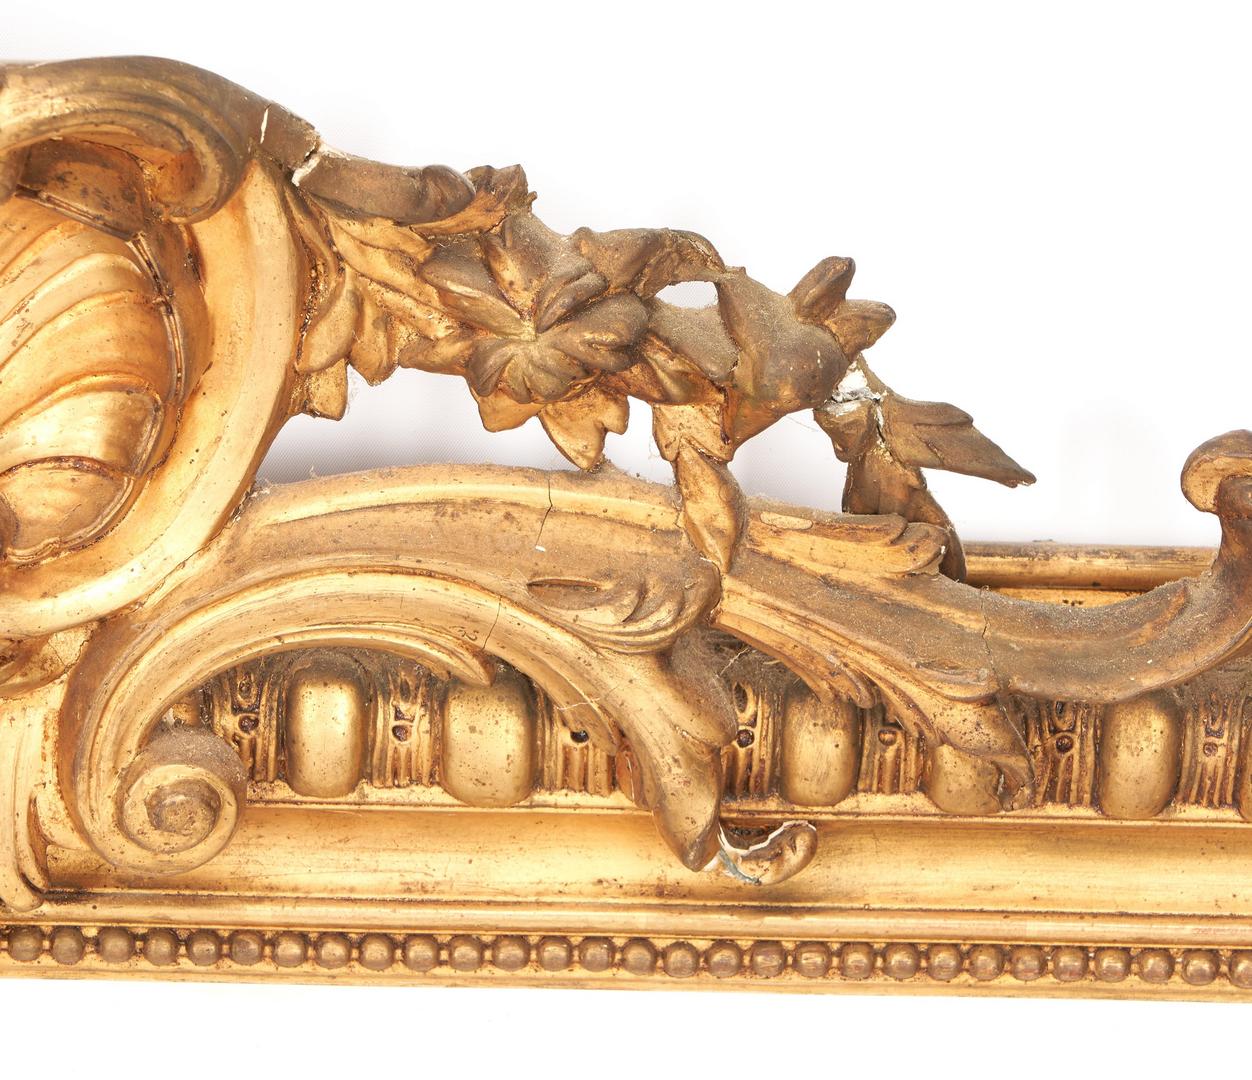 Lot 524: French Louis Philippe Gilt Mirror, 19th Century